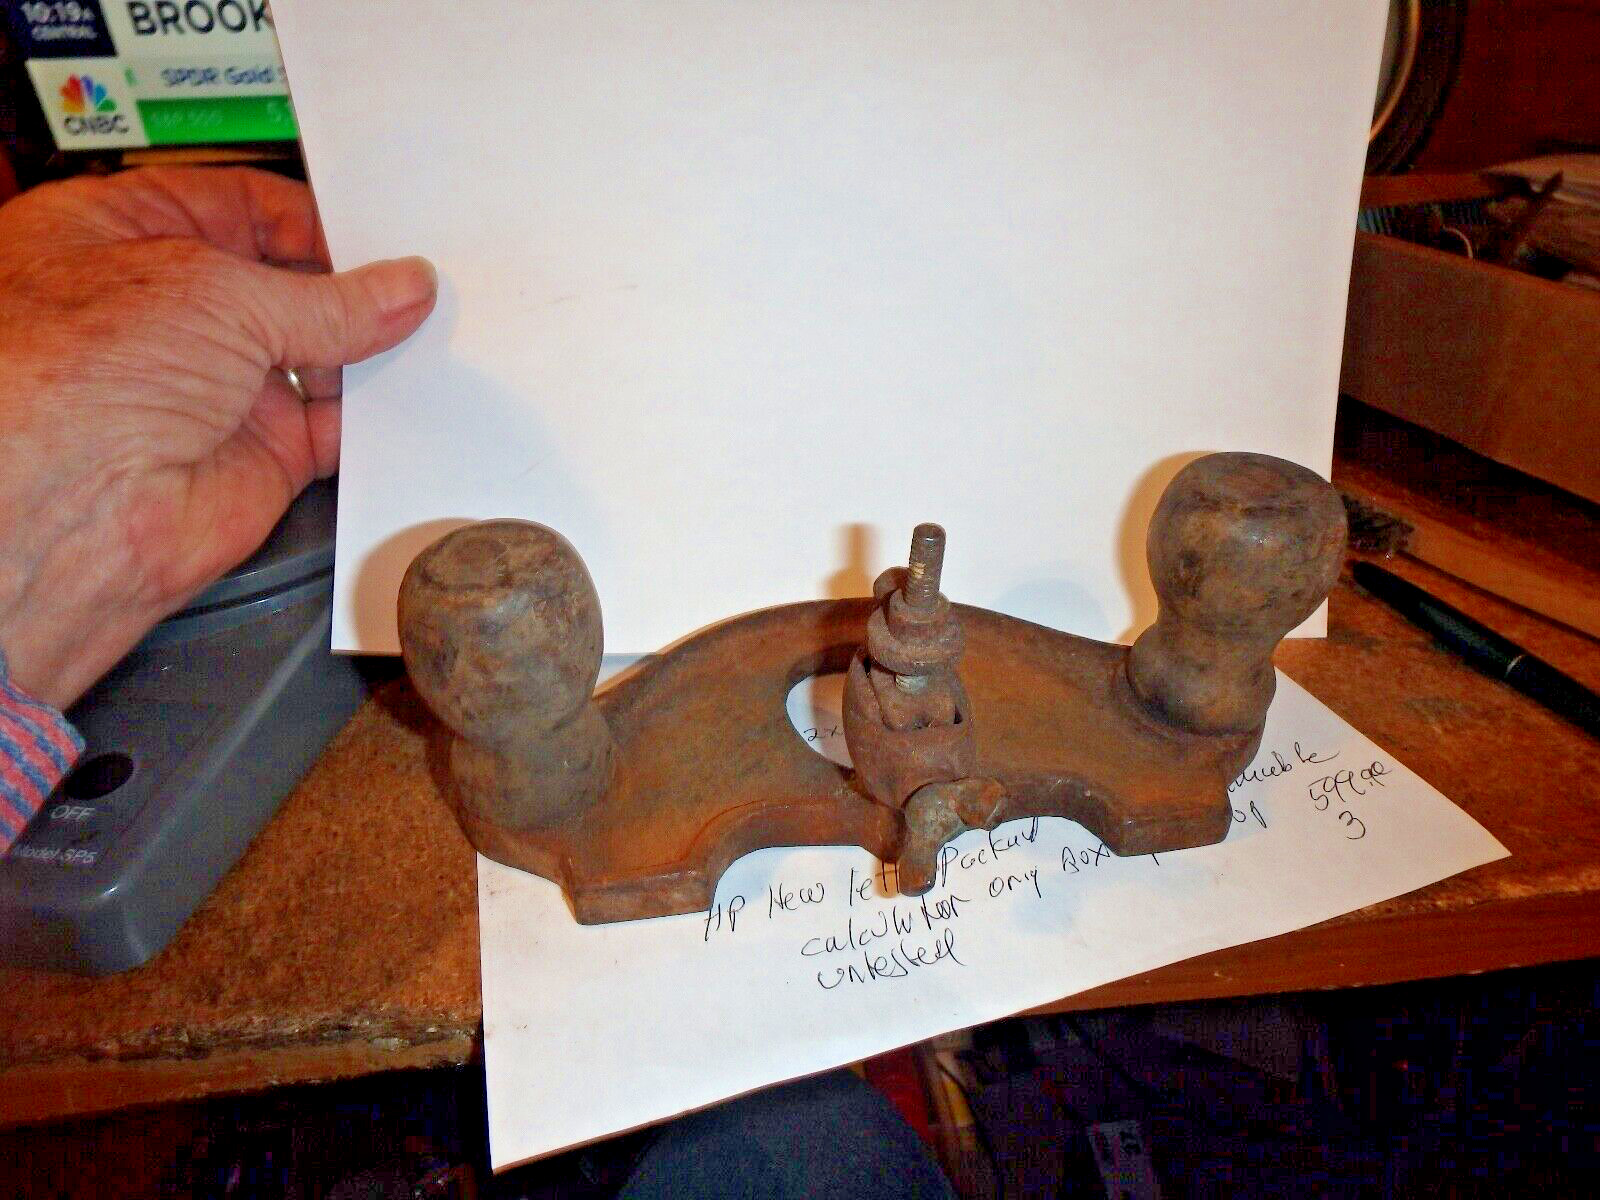 1H- vintage unmarked??? or hard to read router plane (similar to stanley #71)